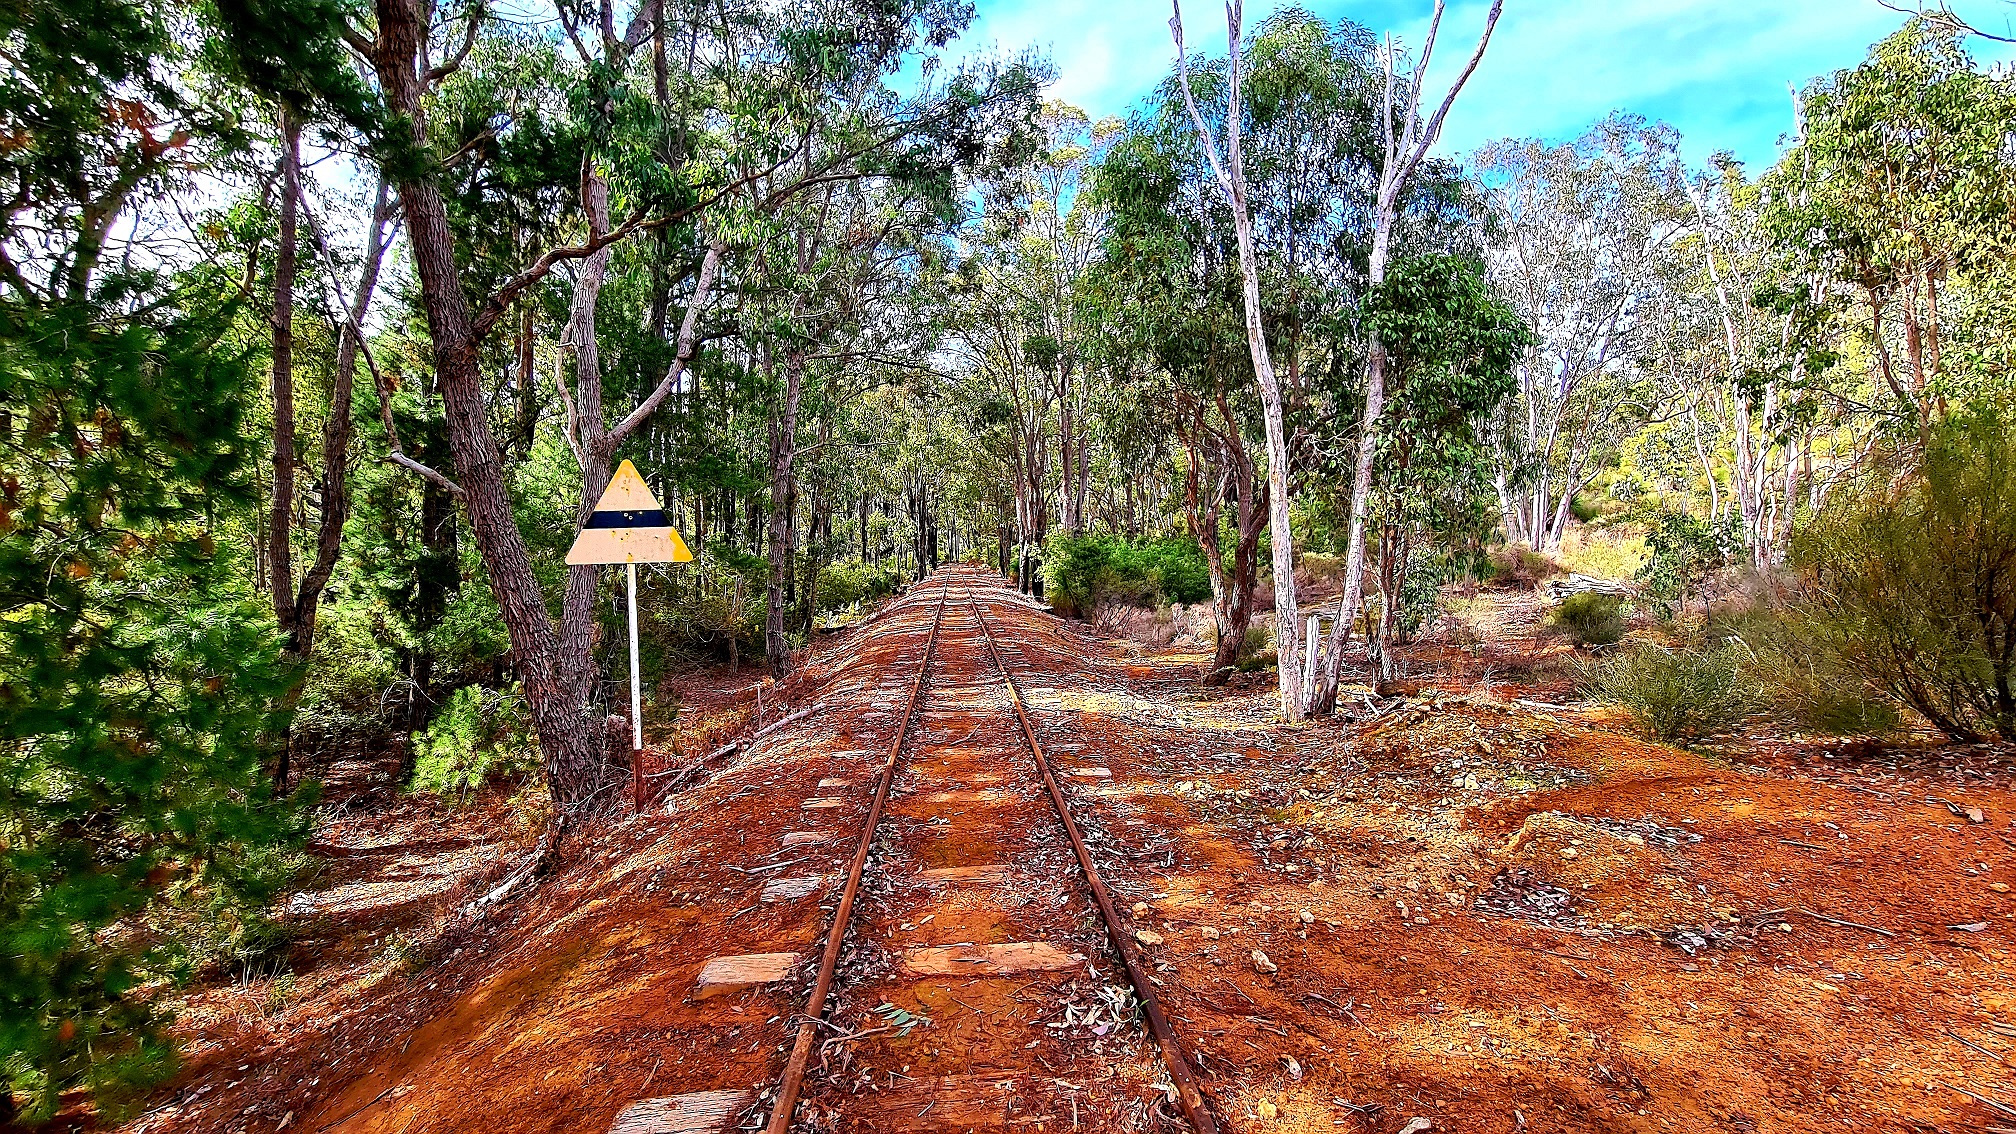 Dwellingup Trains, Trails & Woodfired Delights